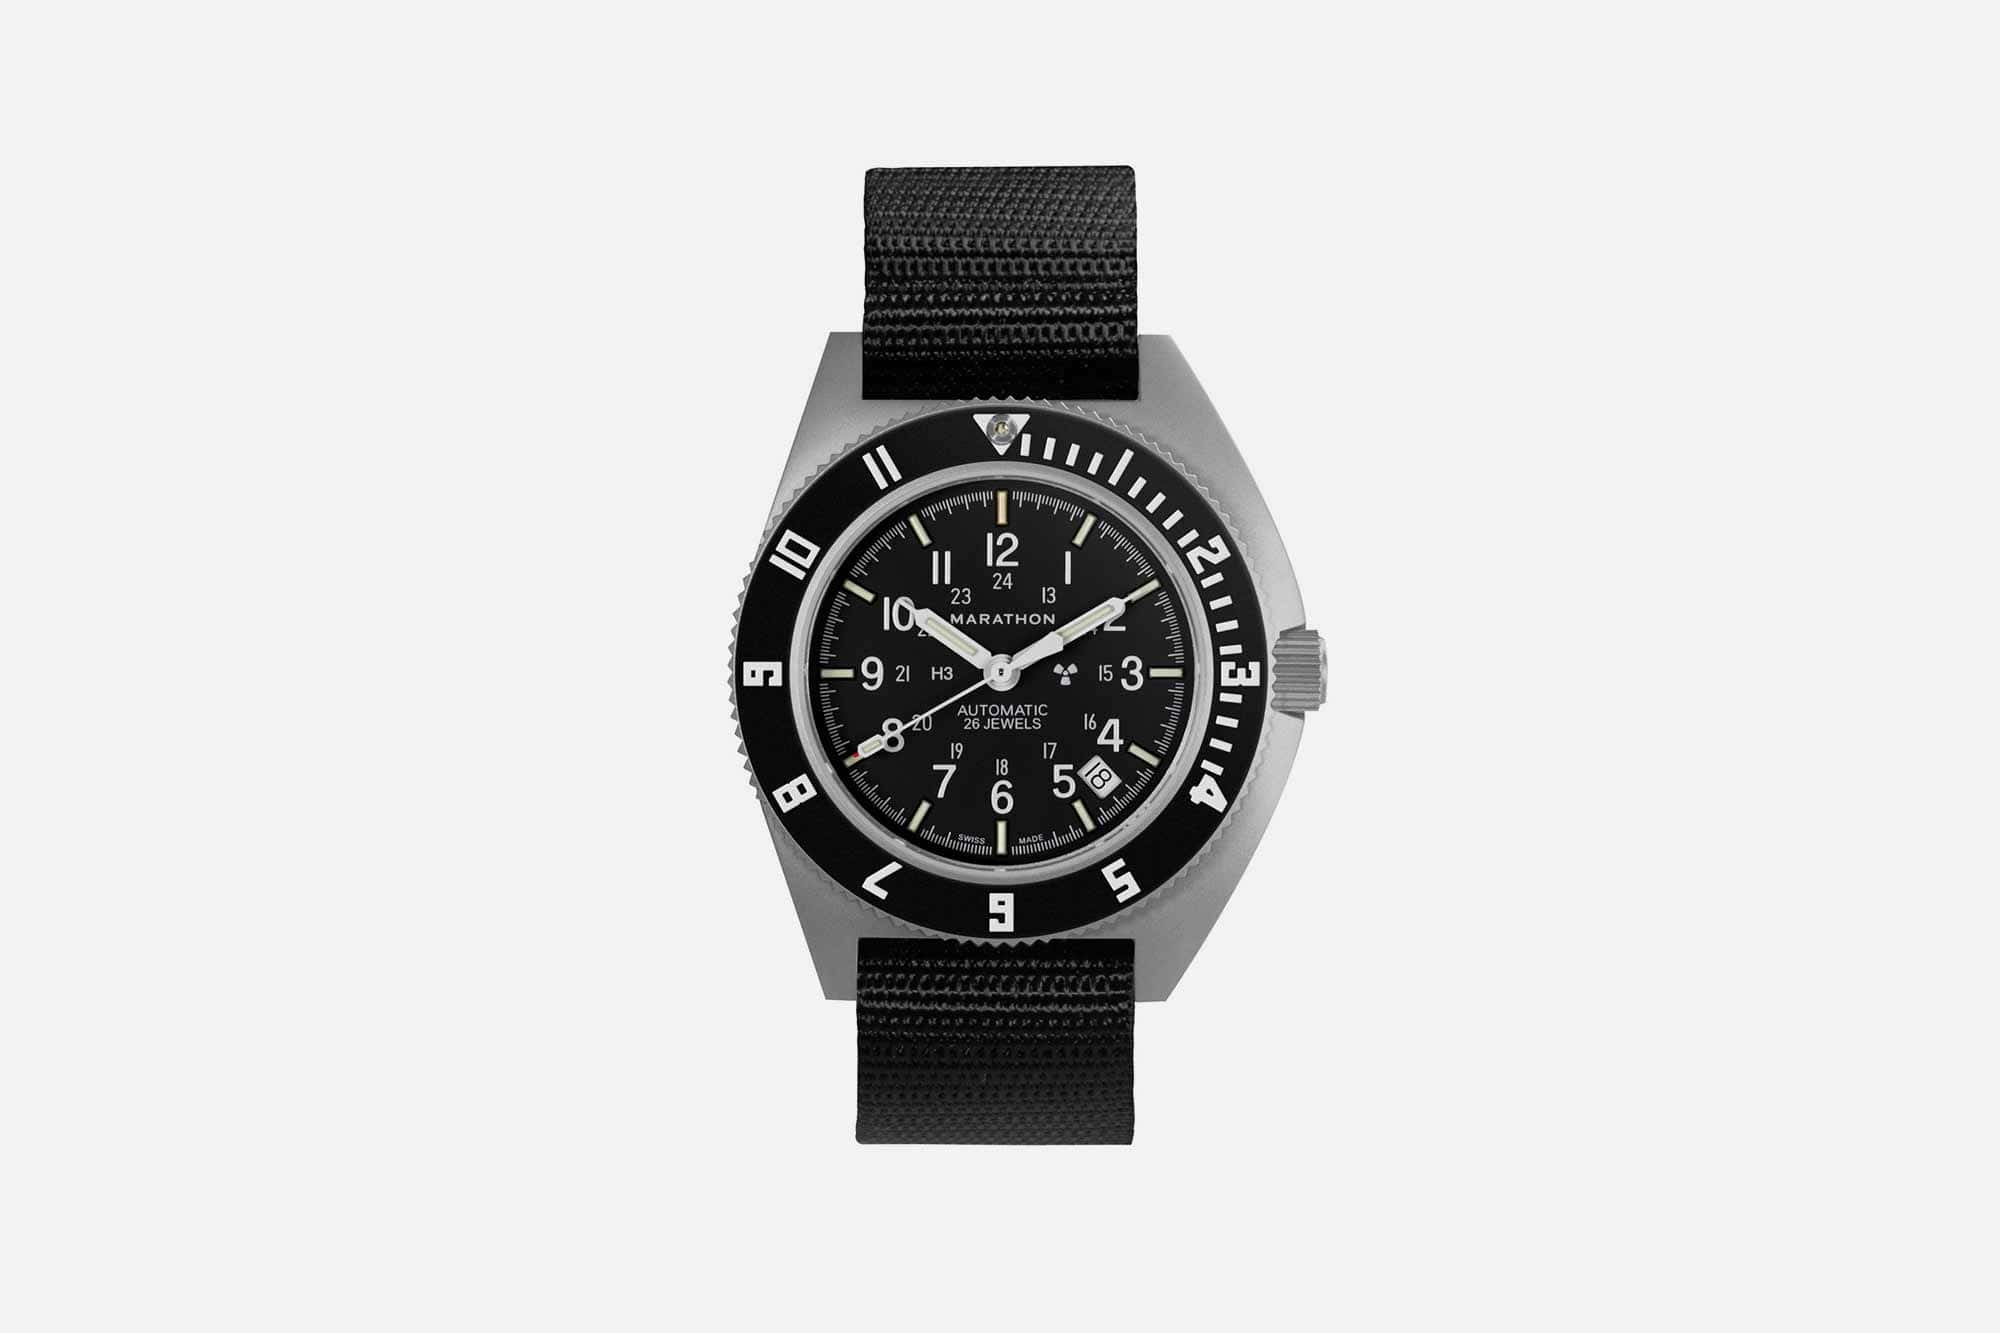 Marathon Introduces a New Steel Navigator with an Automatic Movement